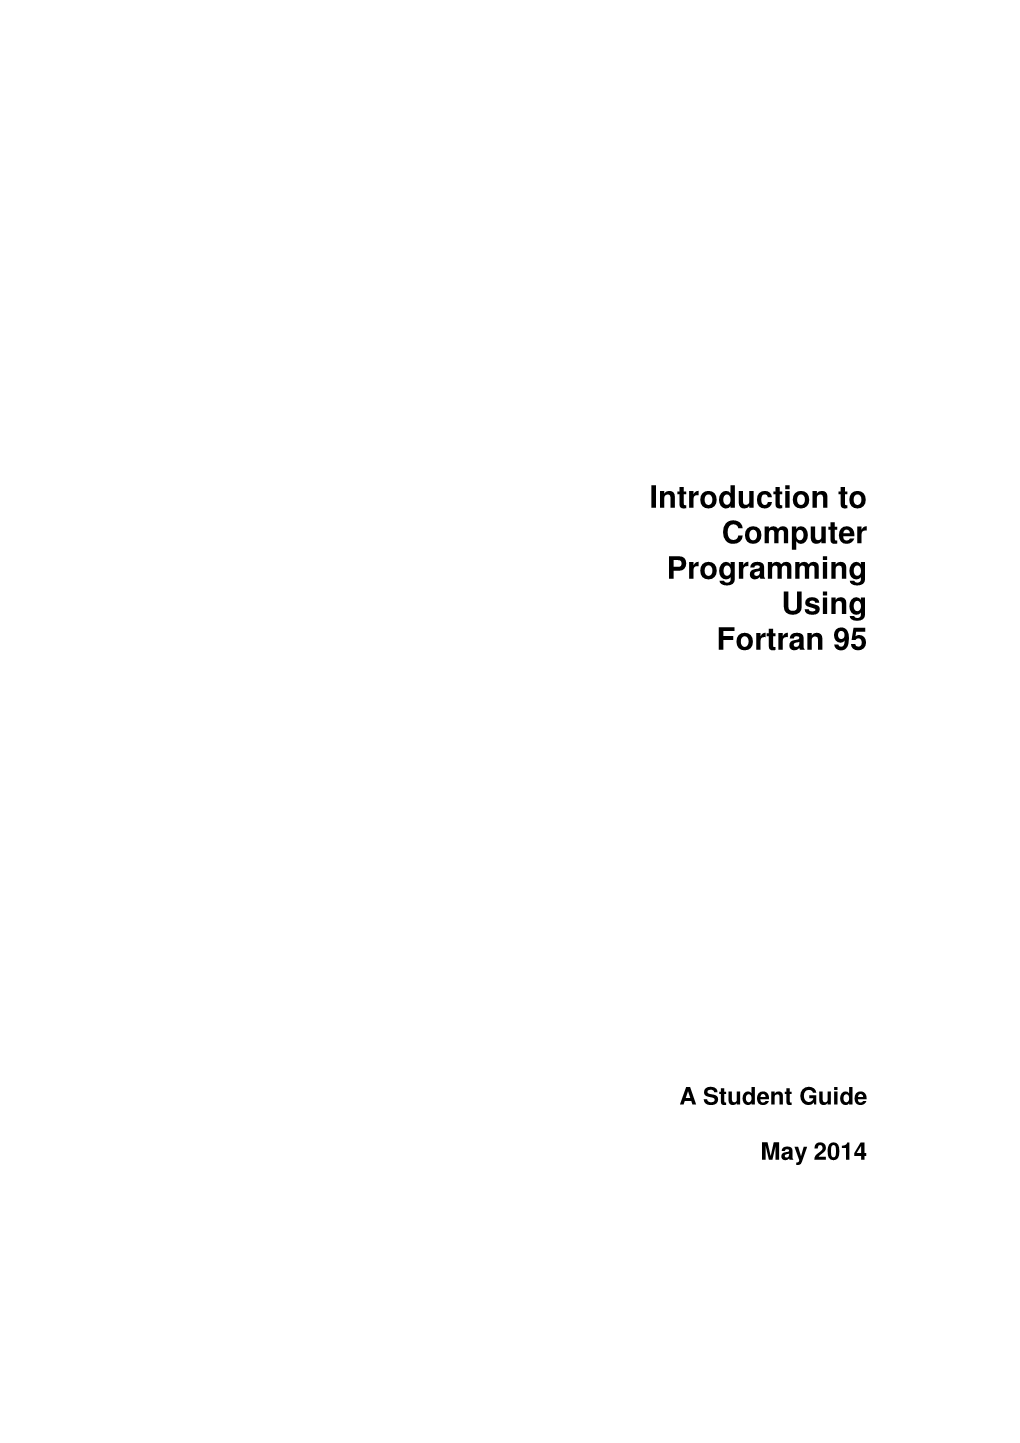 Introduction to Computer Programming Using Fortran 95